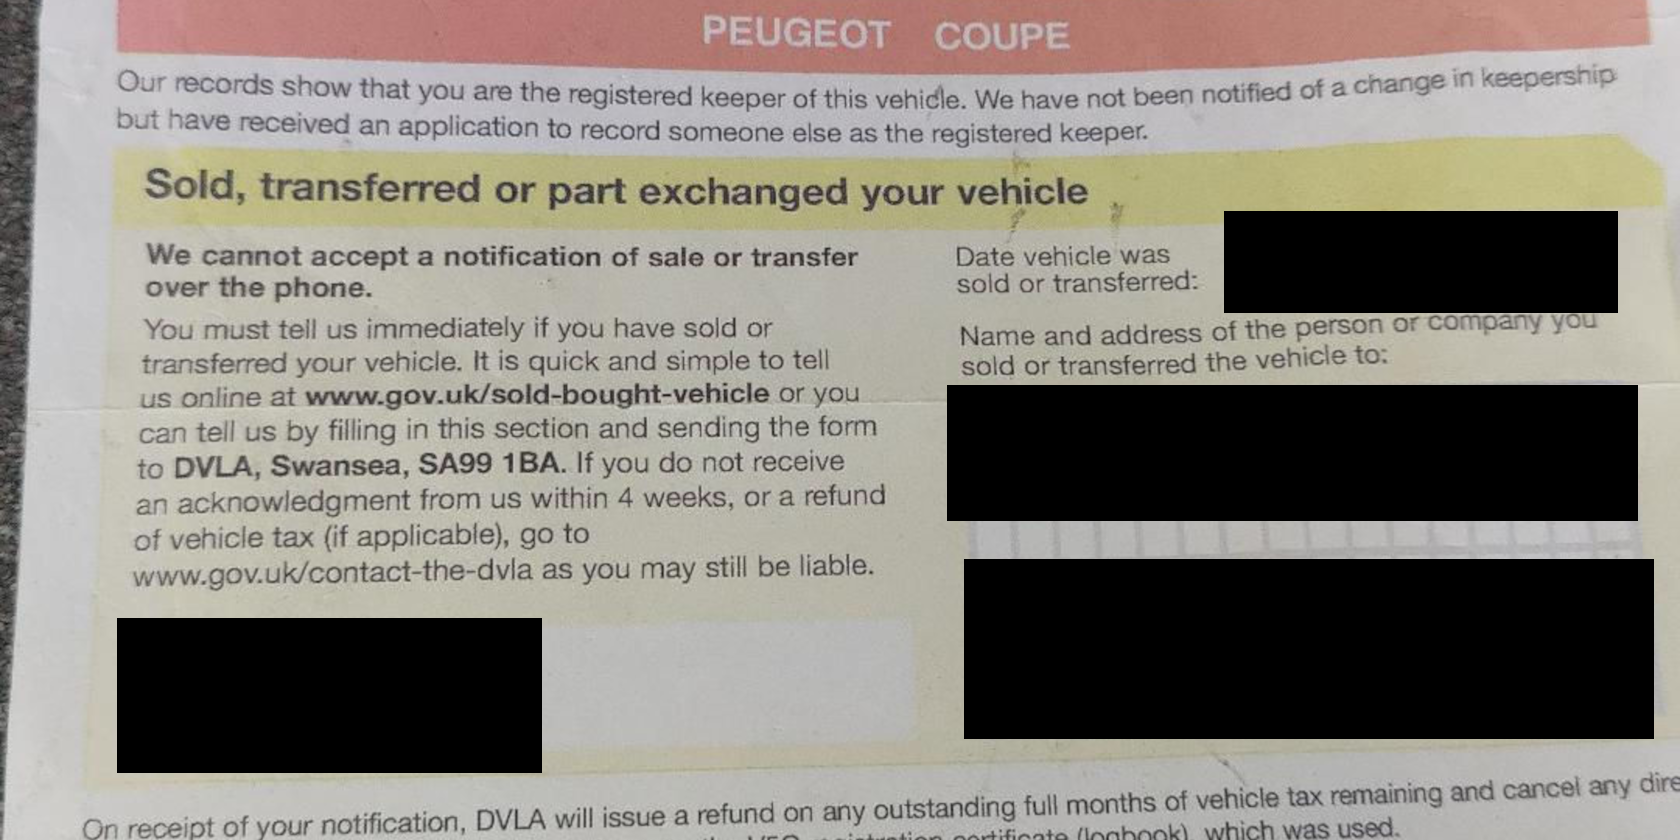 A DVLA document with details blocked by black rectangles